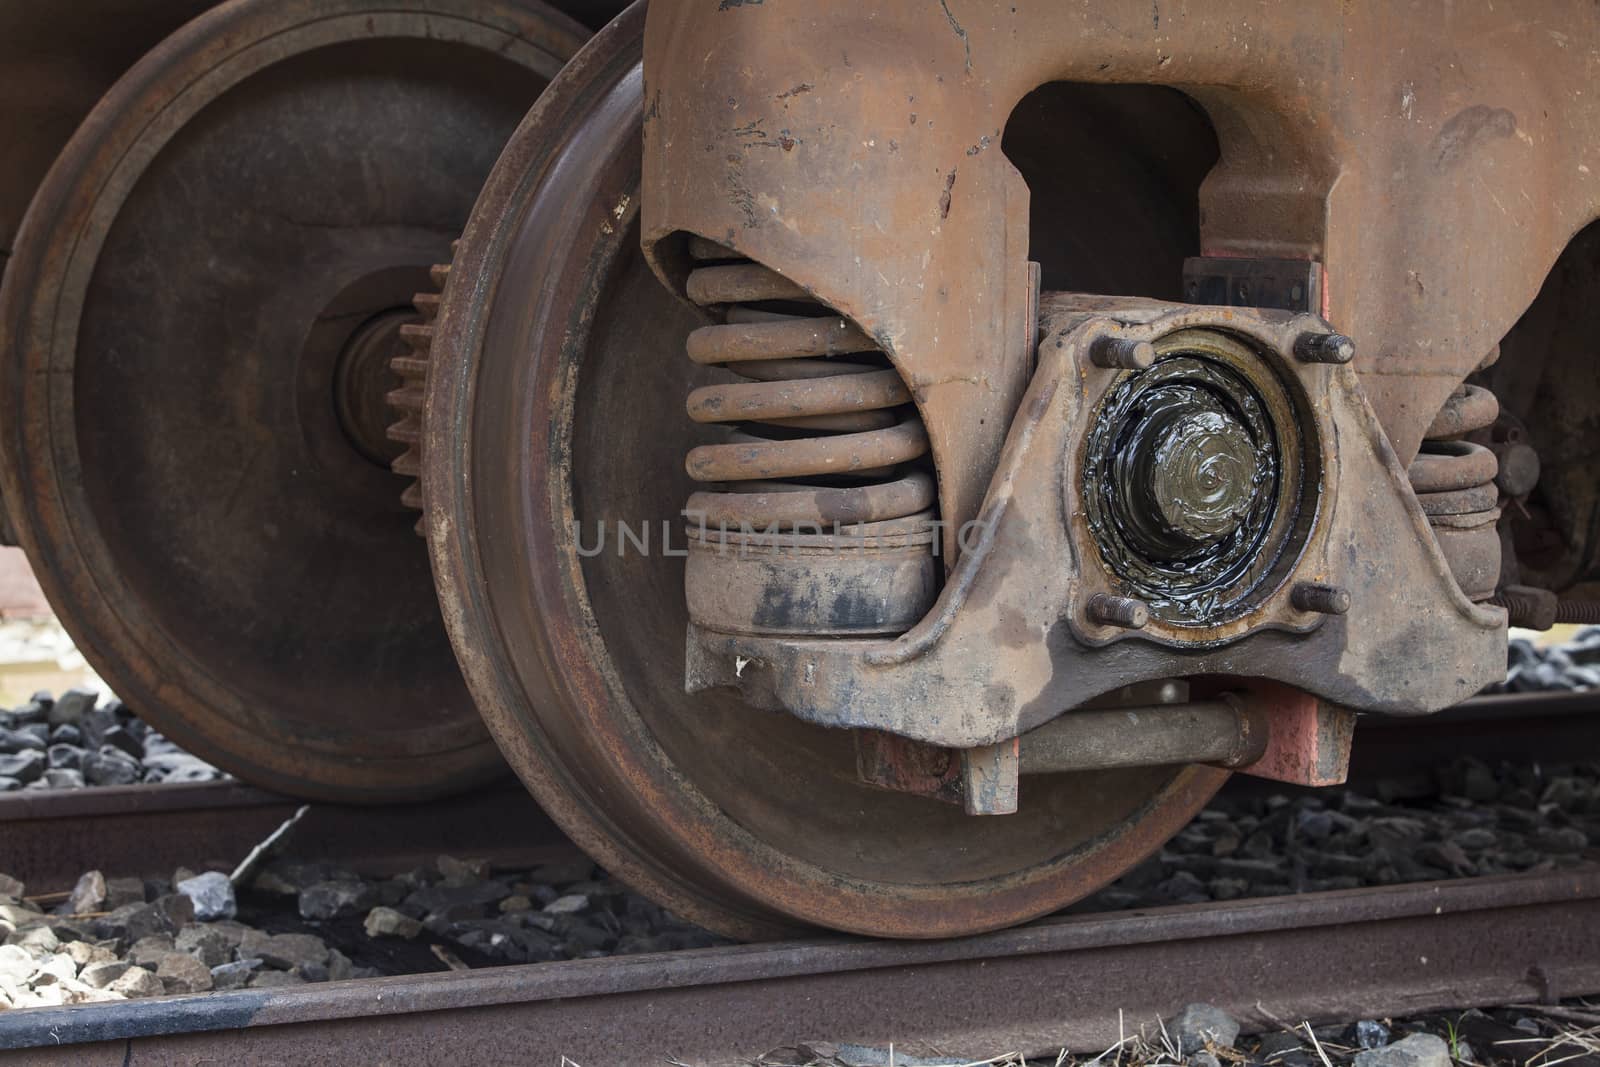 train wheels from metal during the movement of the train